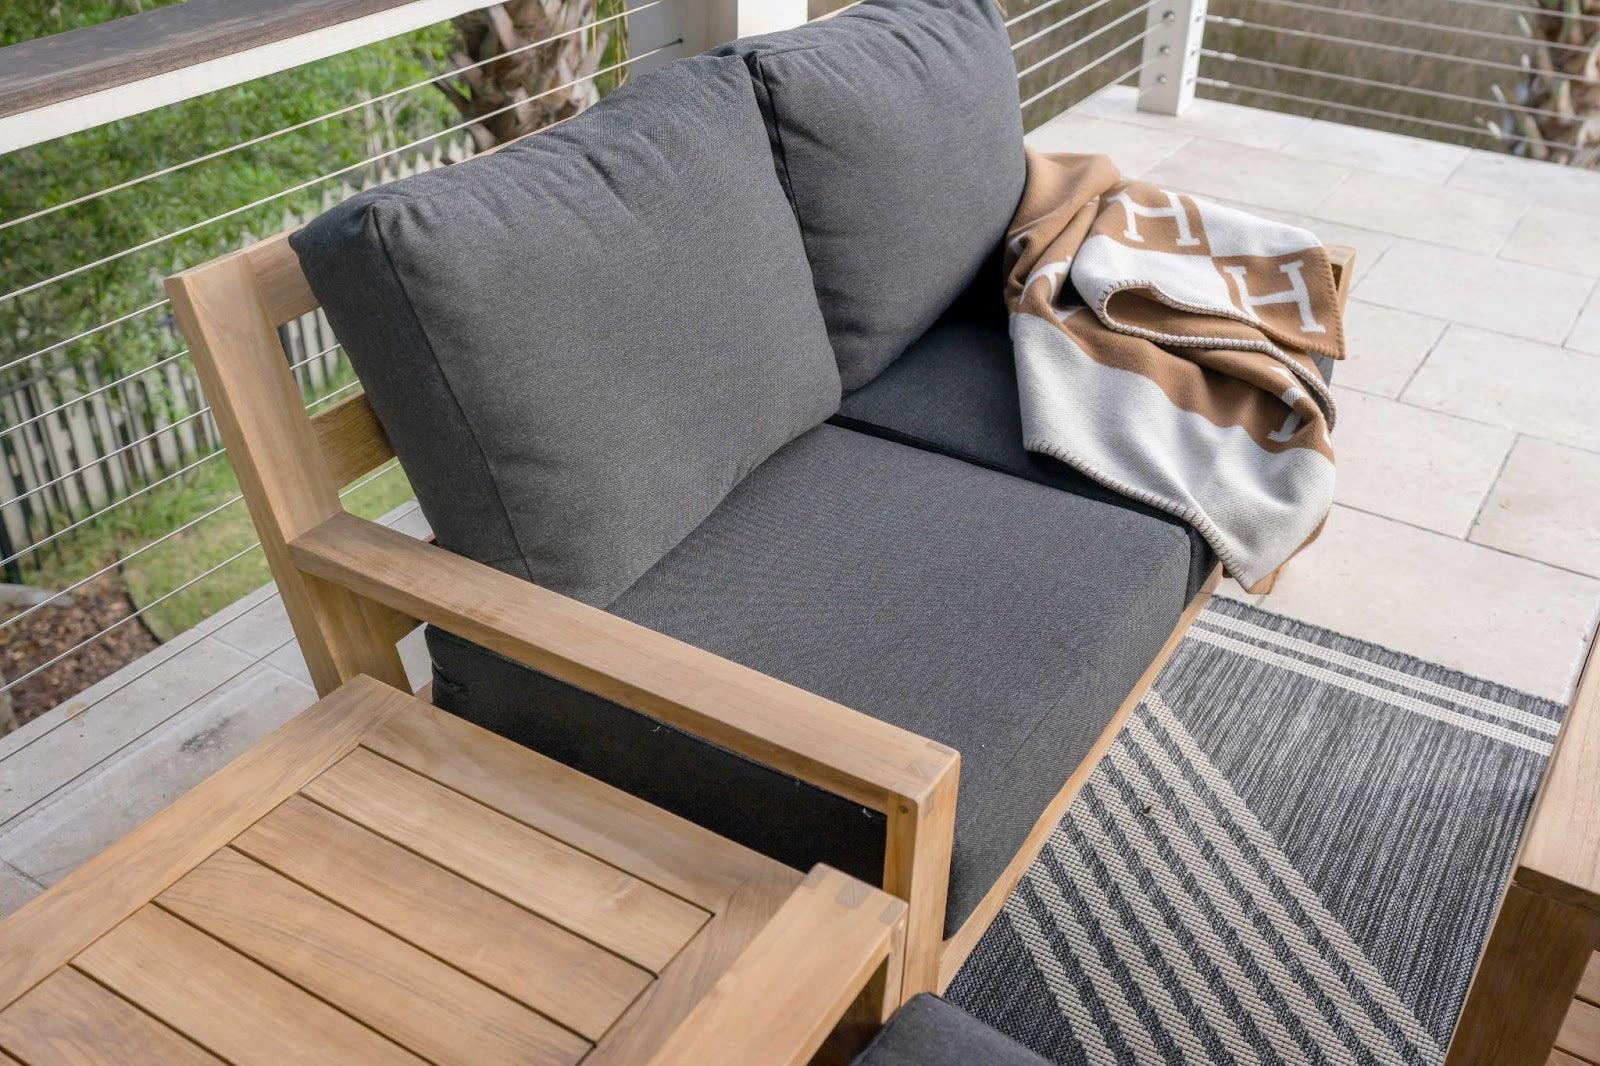 How to Clean Outdoor Furniture Cushions: The Ultimate Guide